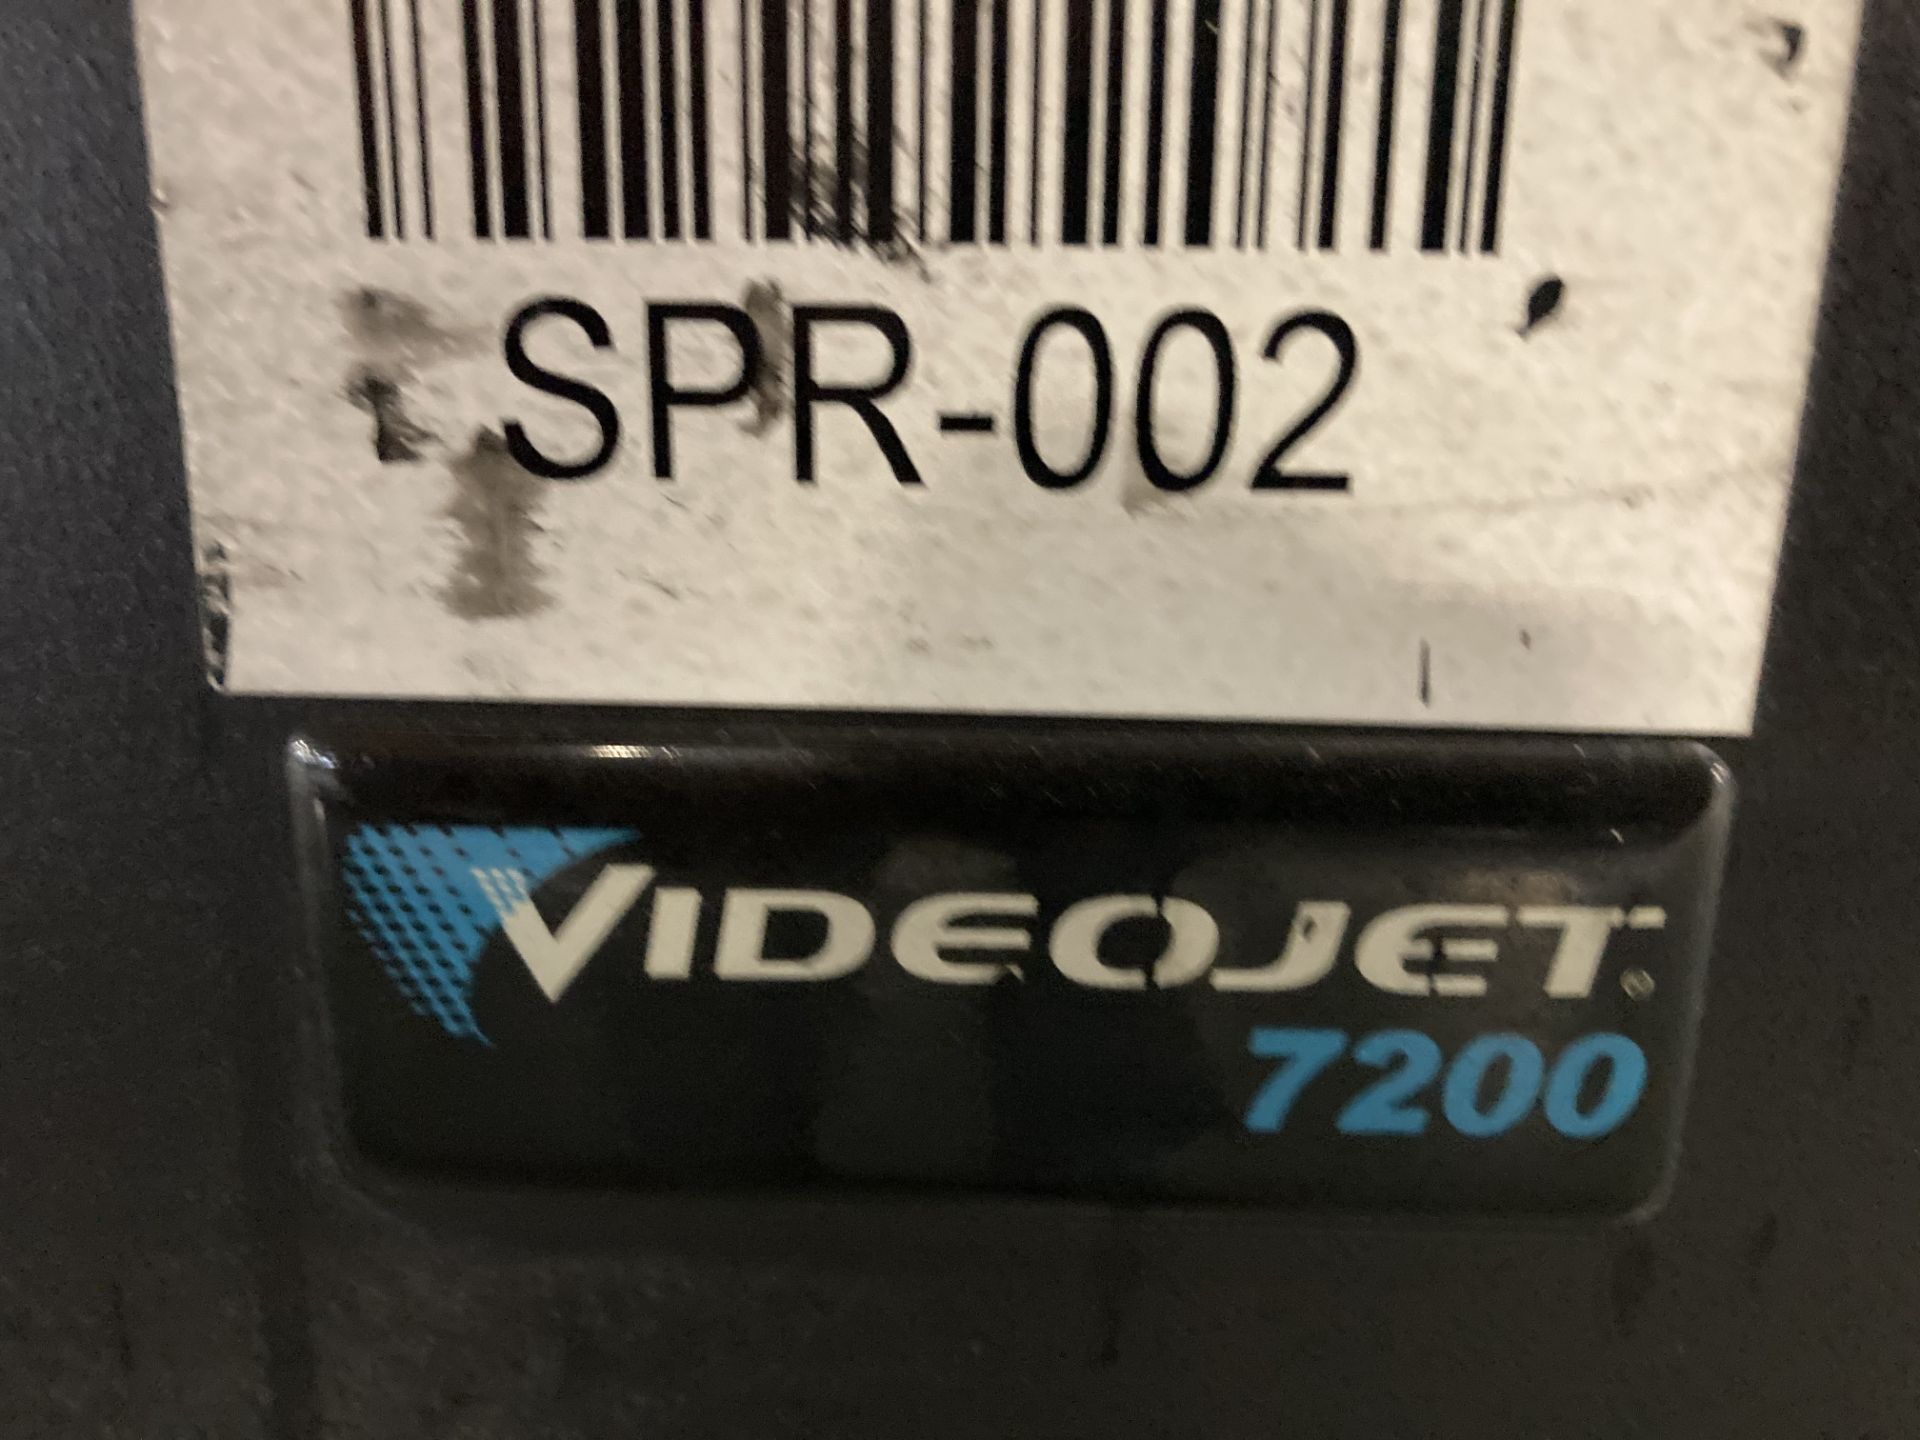 VideoJet 7200 Printer System w/ Ext Table - Image 13 of 13